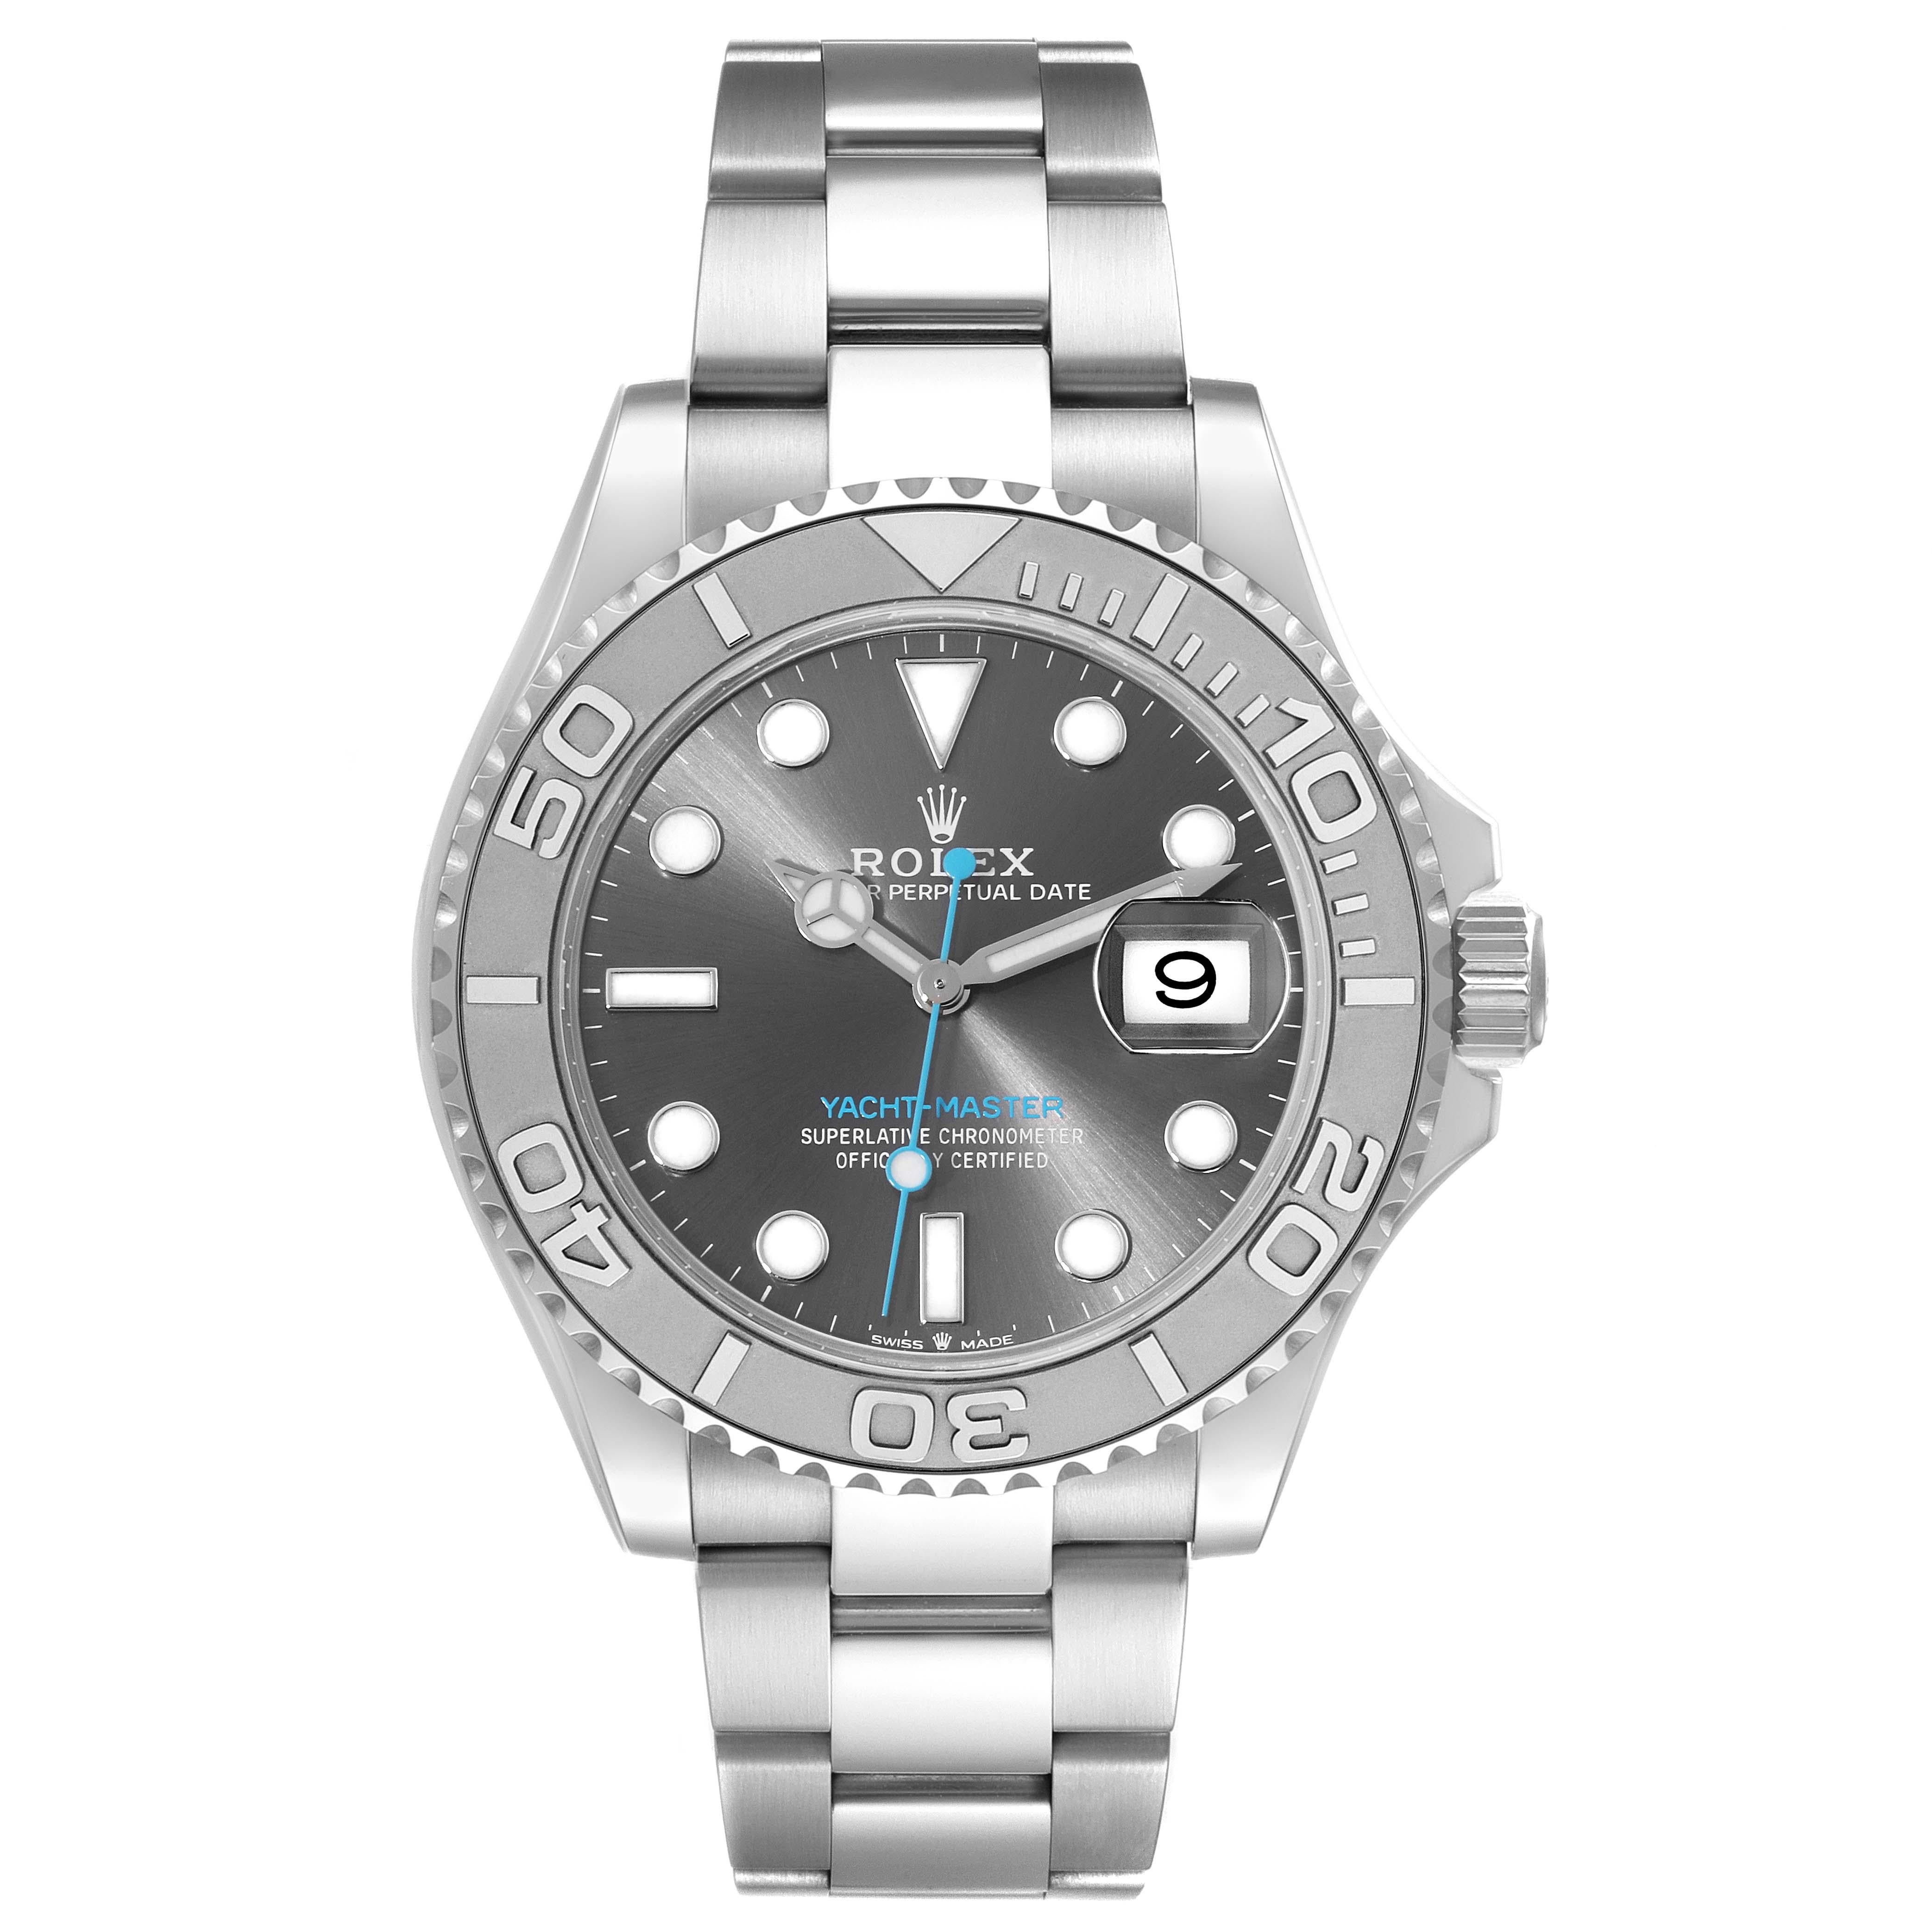 Rolex Yachtmaster Steel Platinum Bezel Rhodium Dial Mens Watch 126622 Box Card. Officially certified chronometer automatic self-winding movement. Stainless steel case 40.0 mm in diameter. Rolex logo on the crown. Platinum special time-lapse